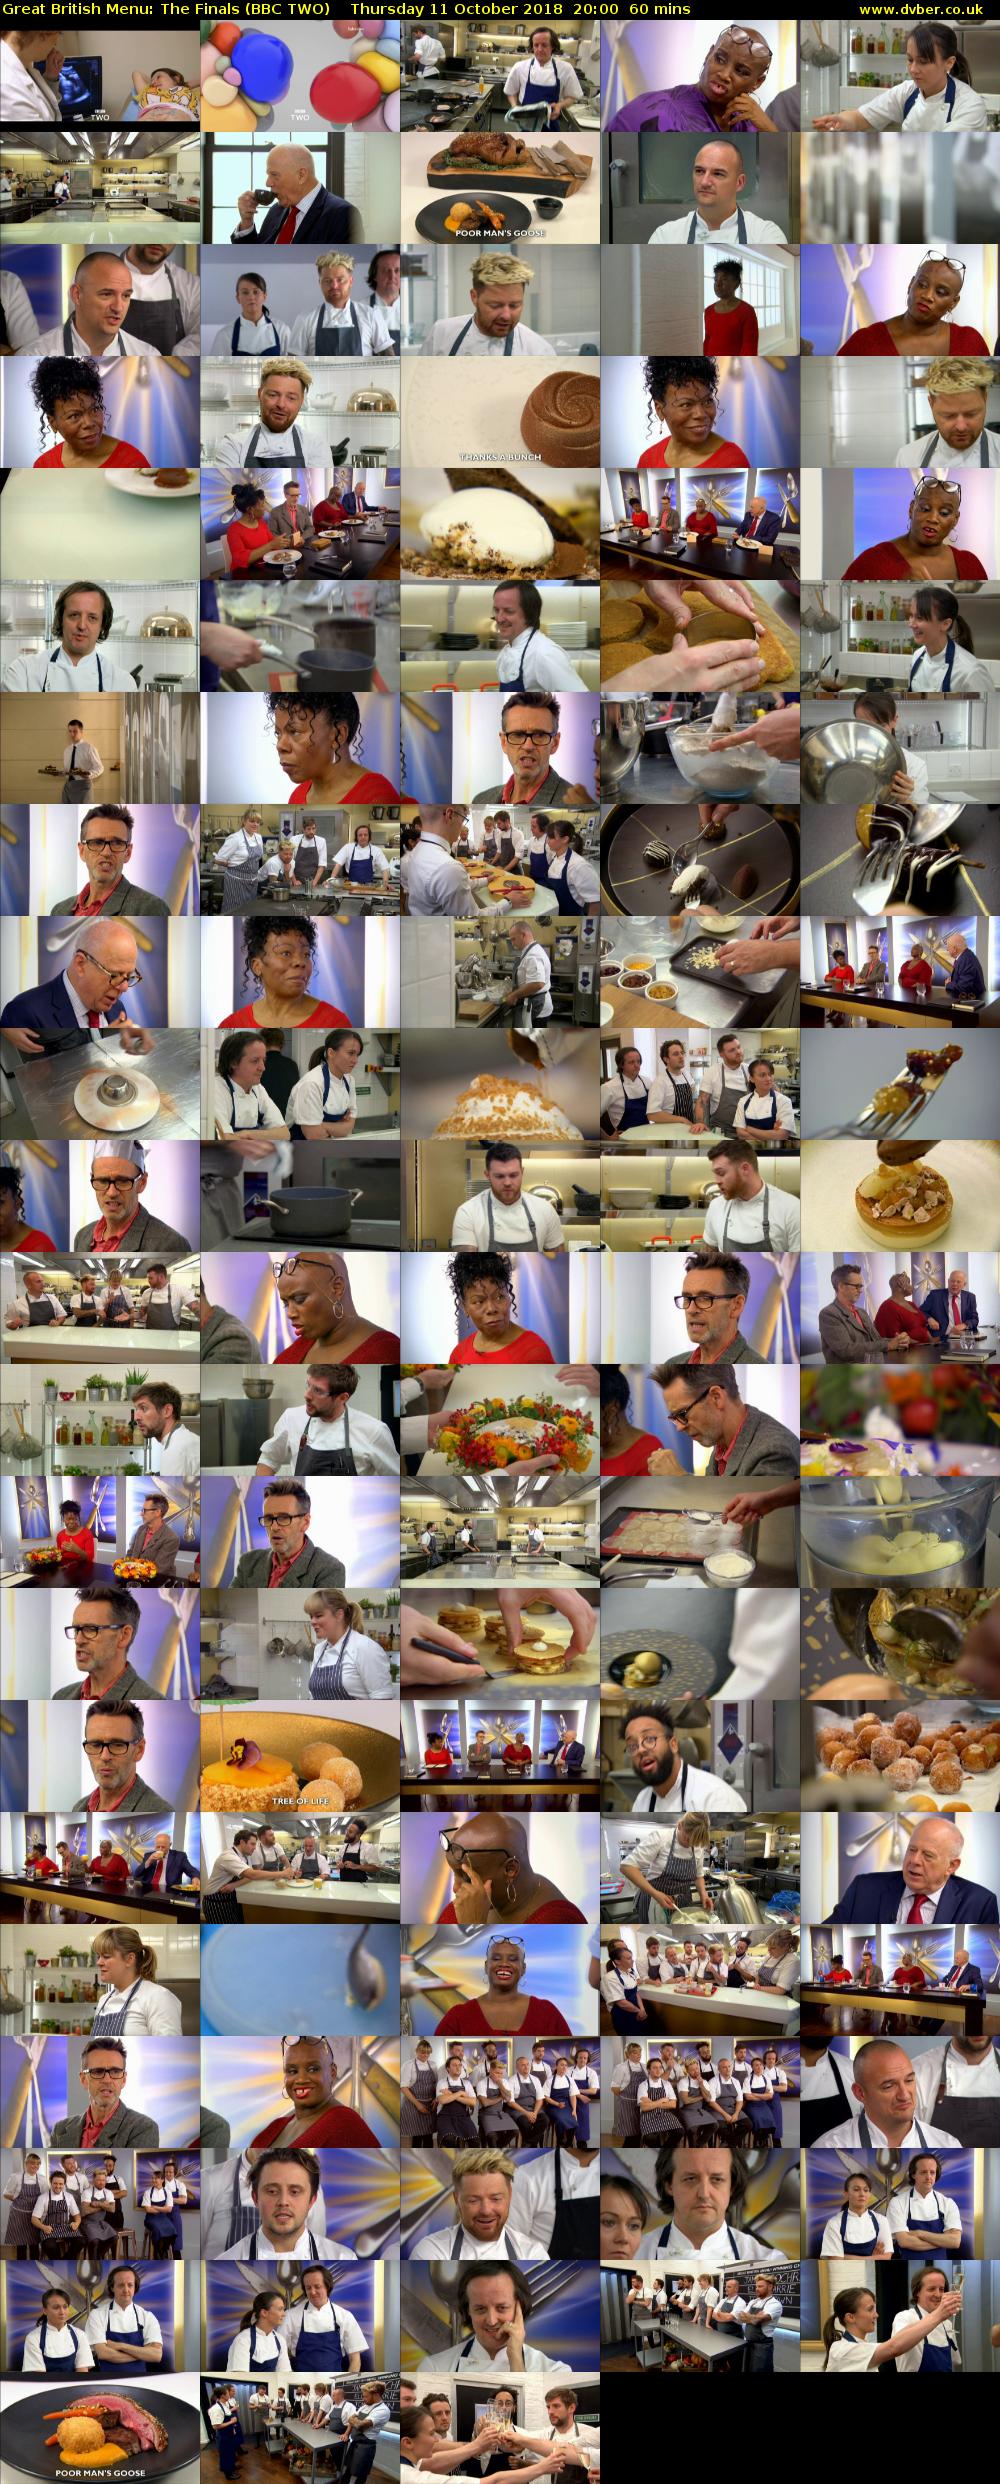 Great British Menu: The Finals (BBC TWO) Thursday 11 October 2018 20:00 - 21:00